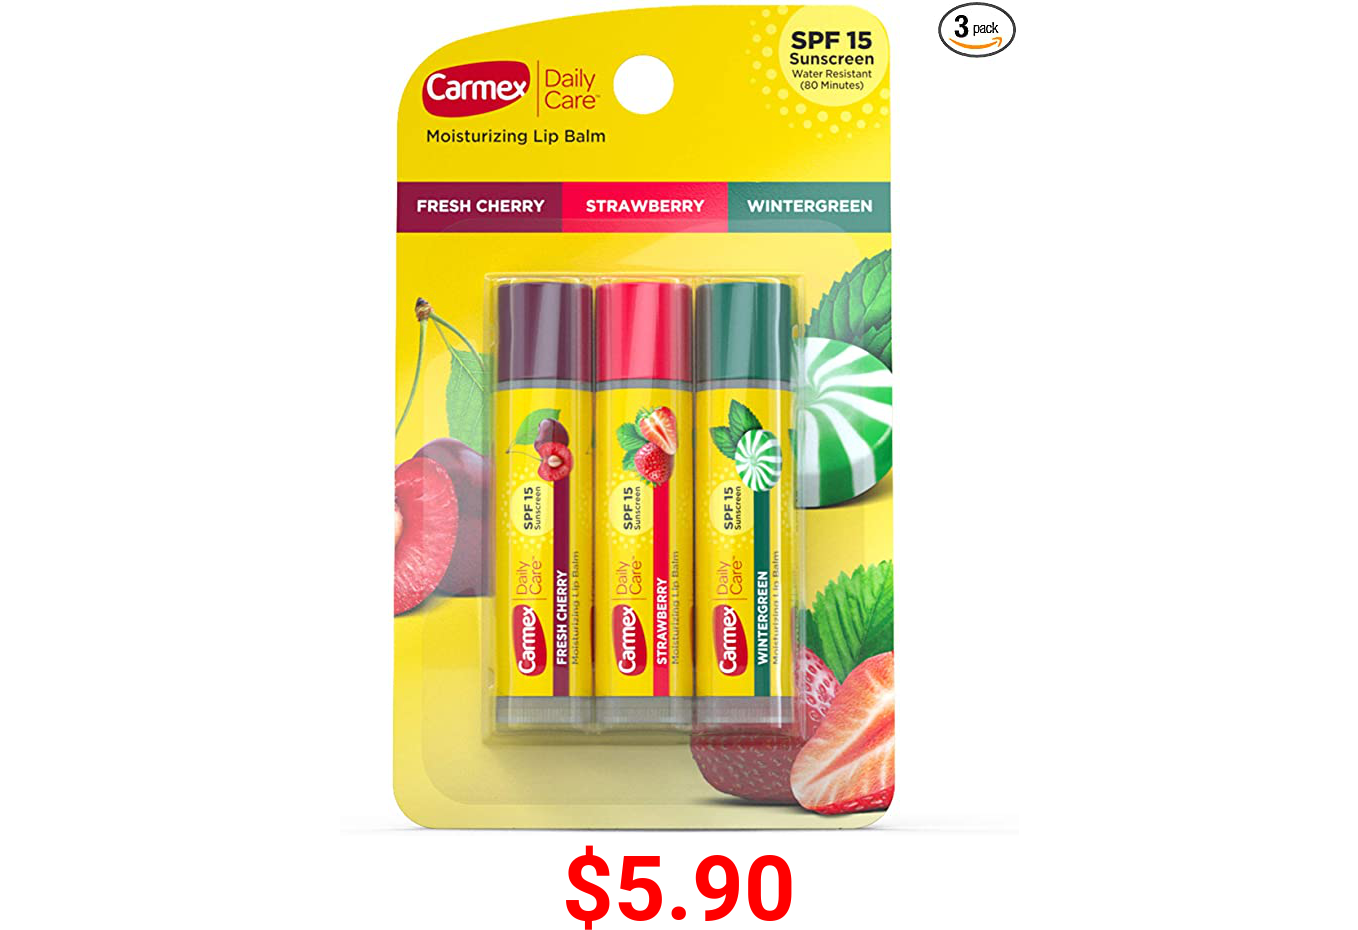 Carmex Daily Care Moisturizing Lip Balm Pack, Lip Balm With Sunscreen in Fresh Cherry, Strawberry and Wintergreen - 3 Count